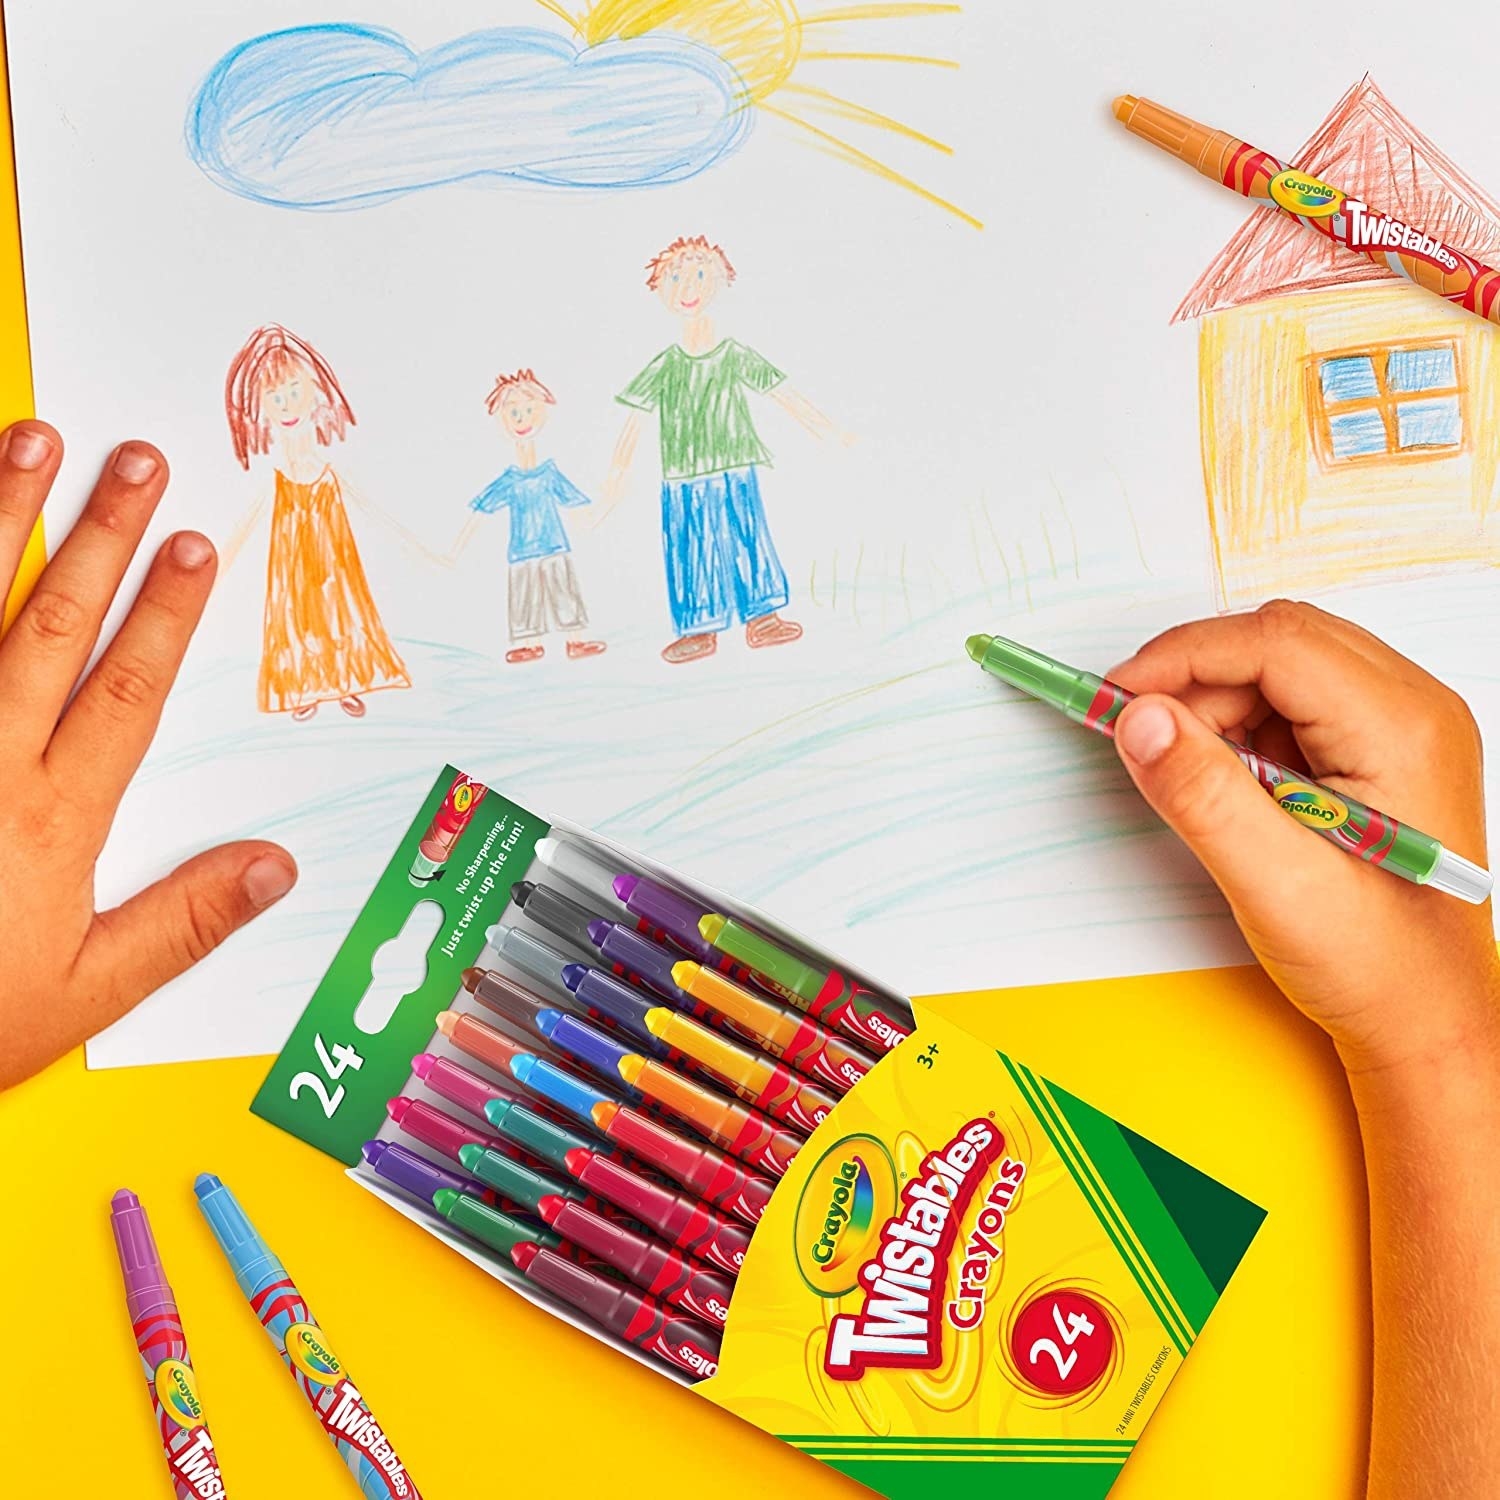 A person colouring with crayons